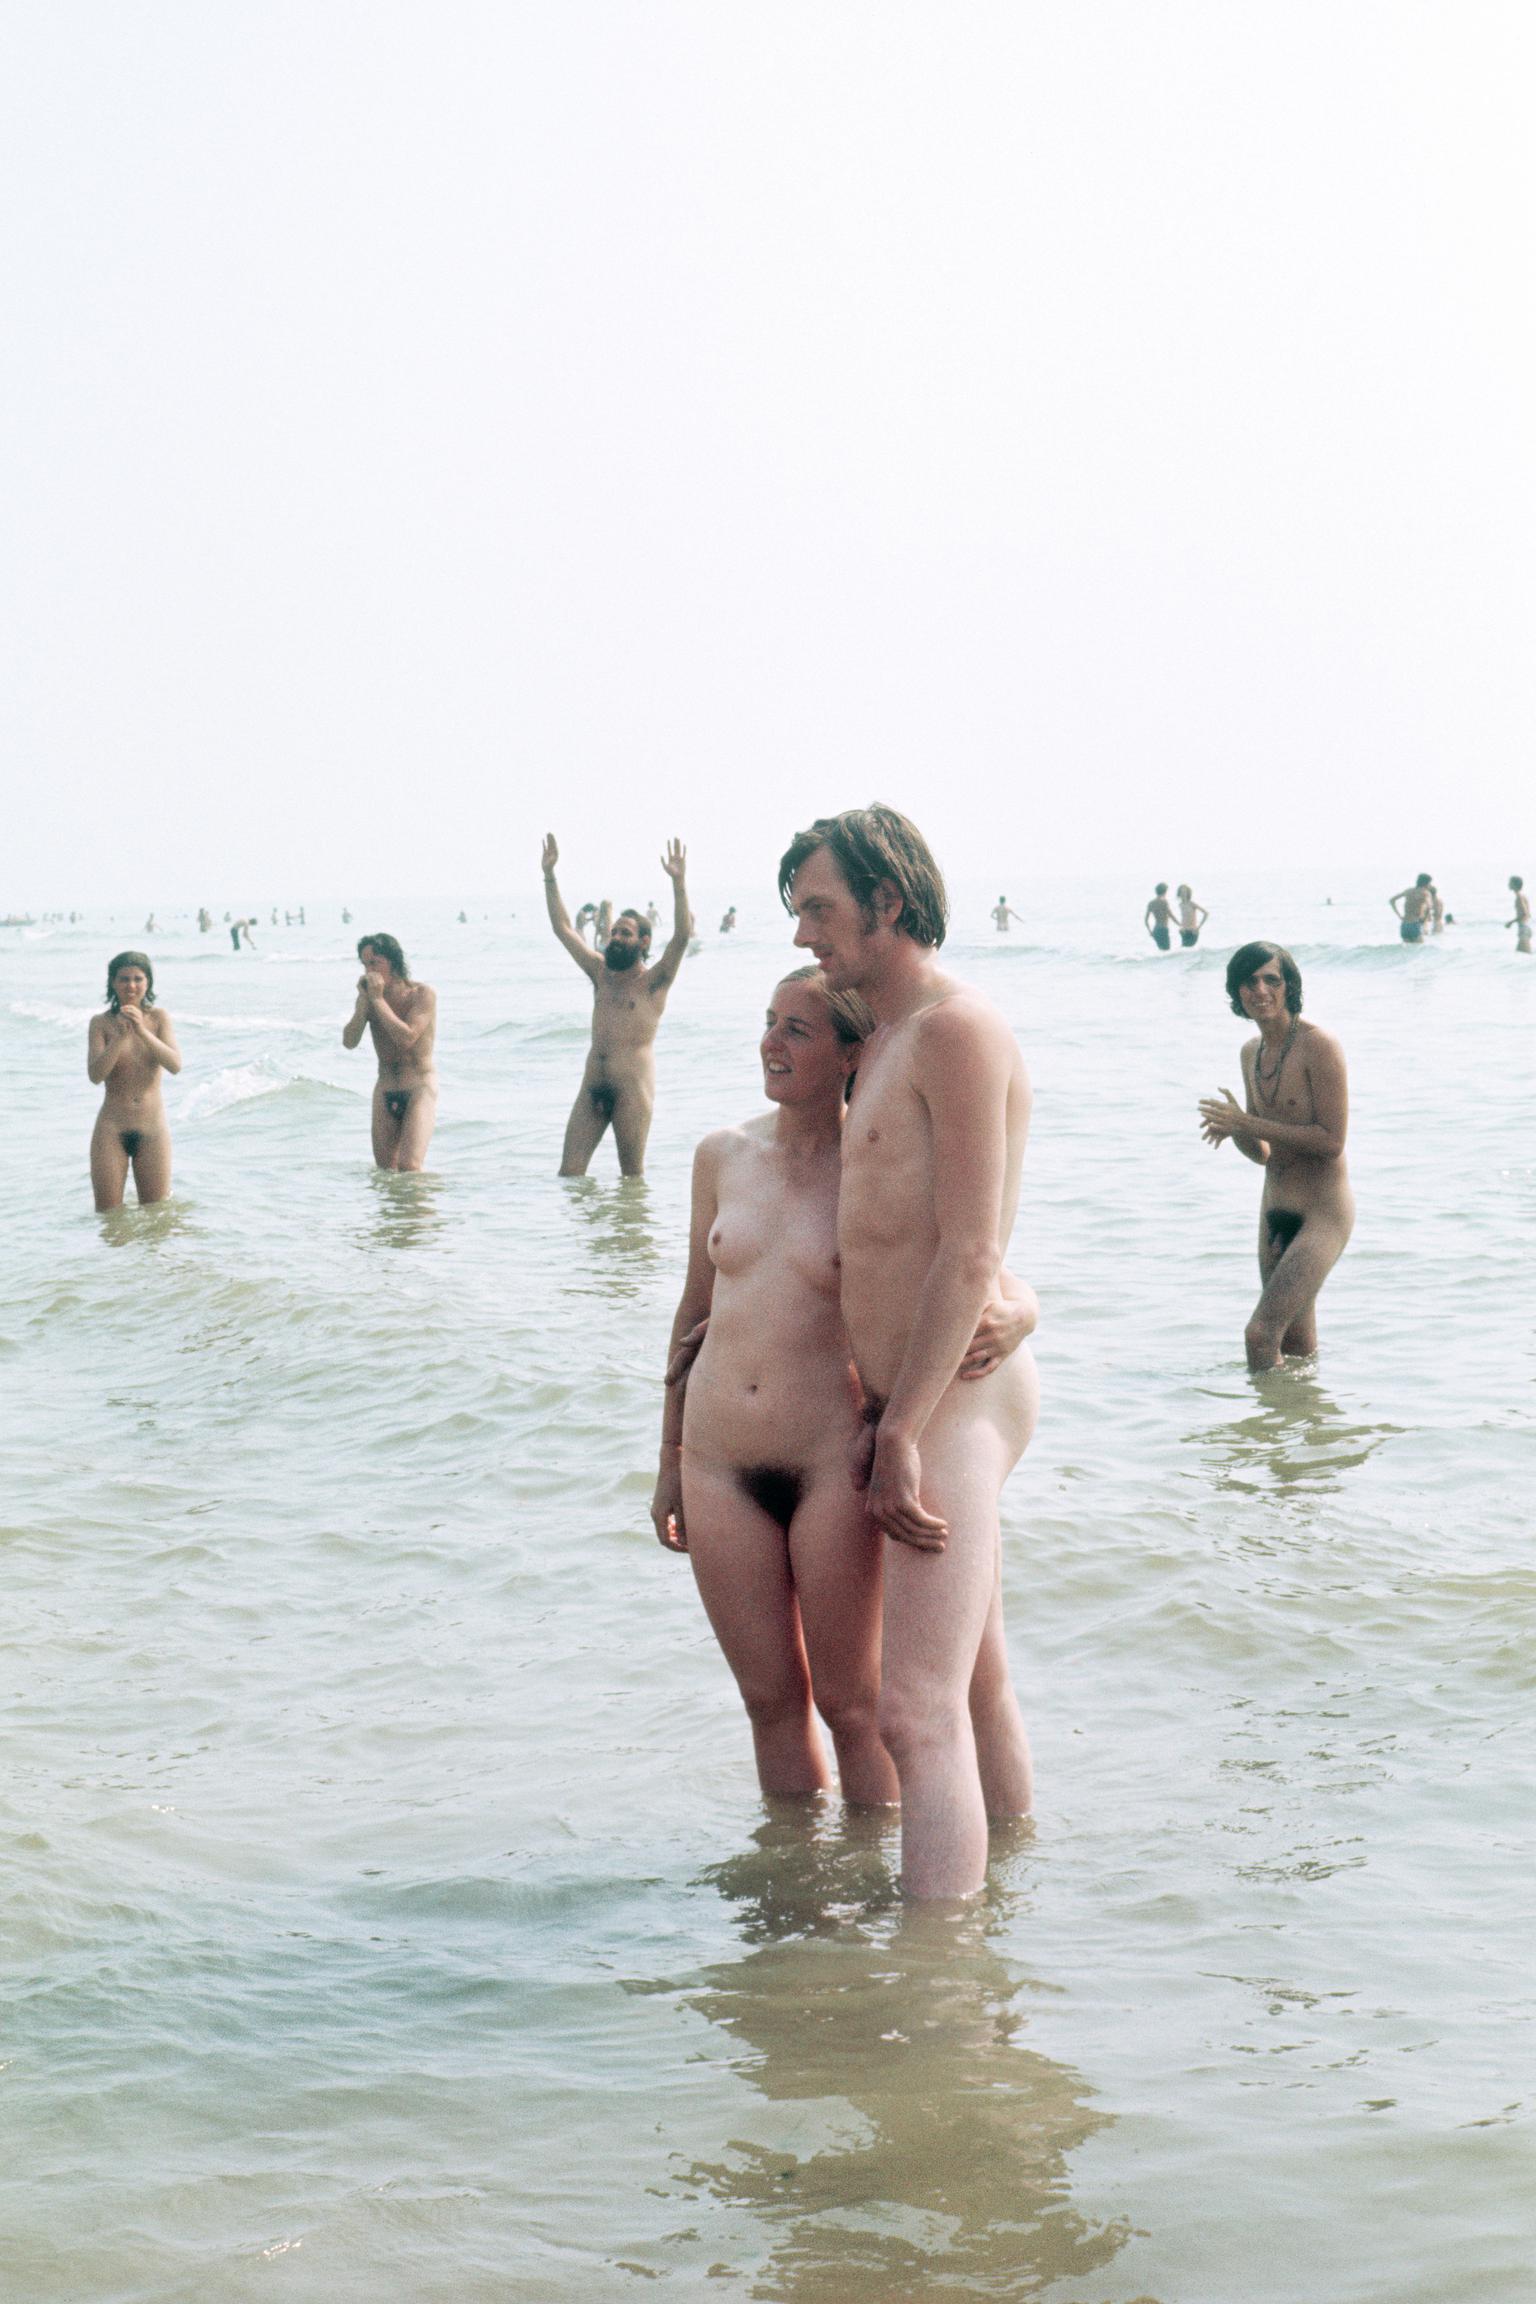 Isle of Wight Festival. A young couple posing naked in the sea